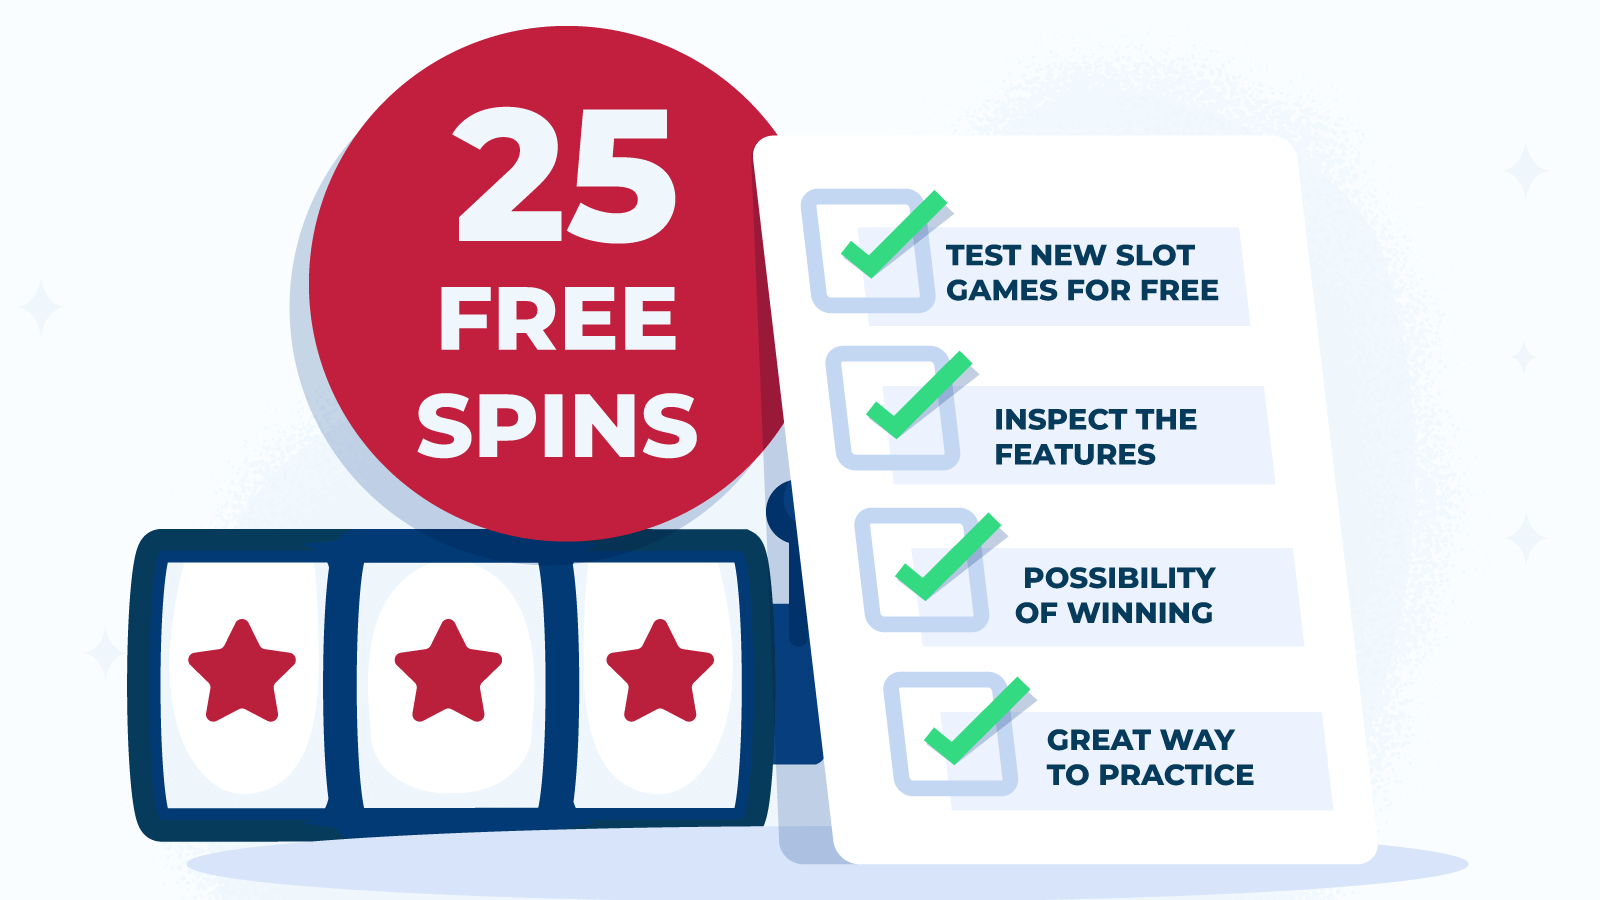 Why Play at a 25 Free Spins No Deposit Casino